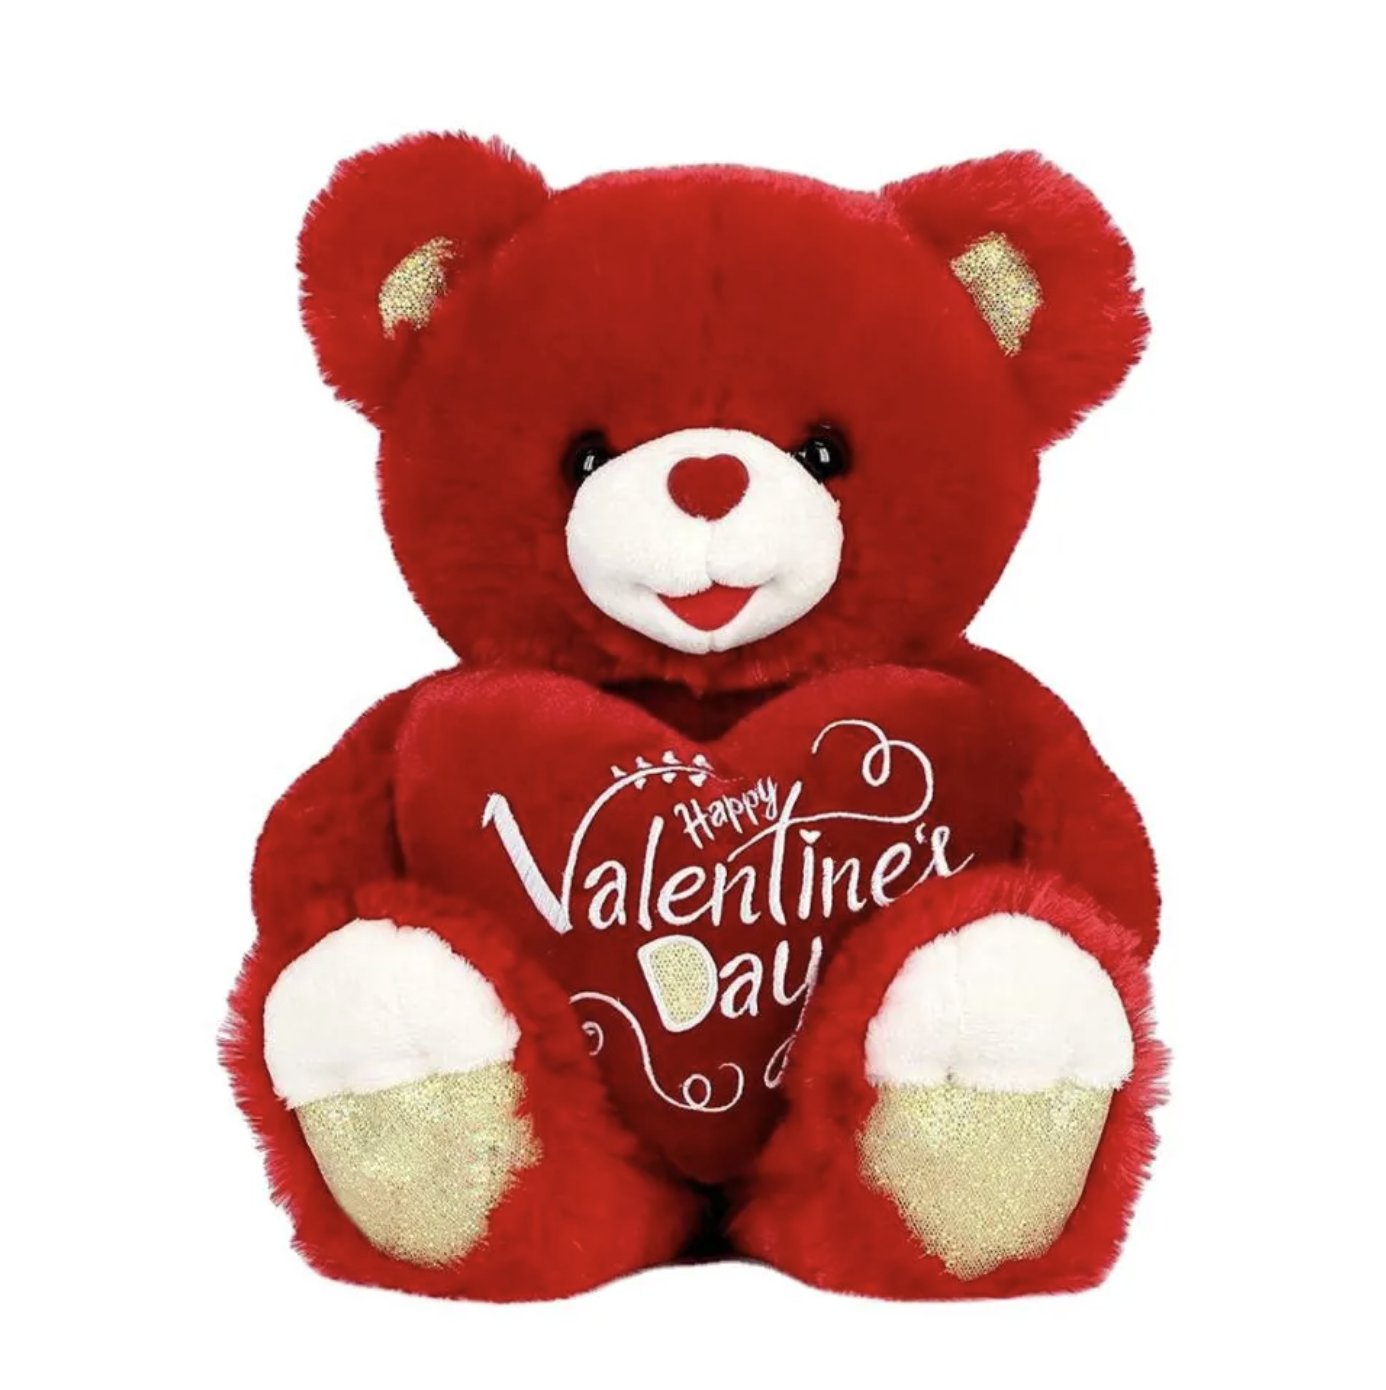 Valentine's Day Red Teddy Bear With Valentine's Gift Love Heart Soft Stuffed Plush Toy